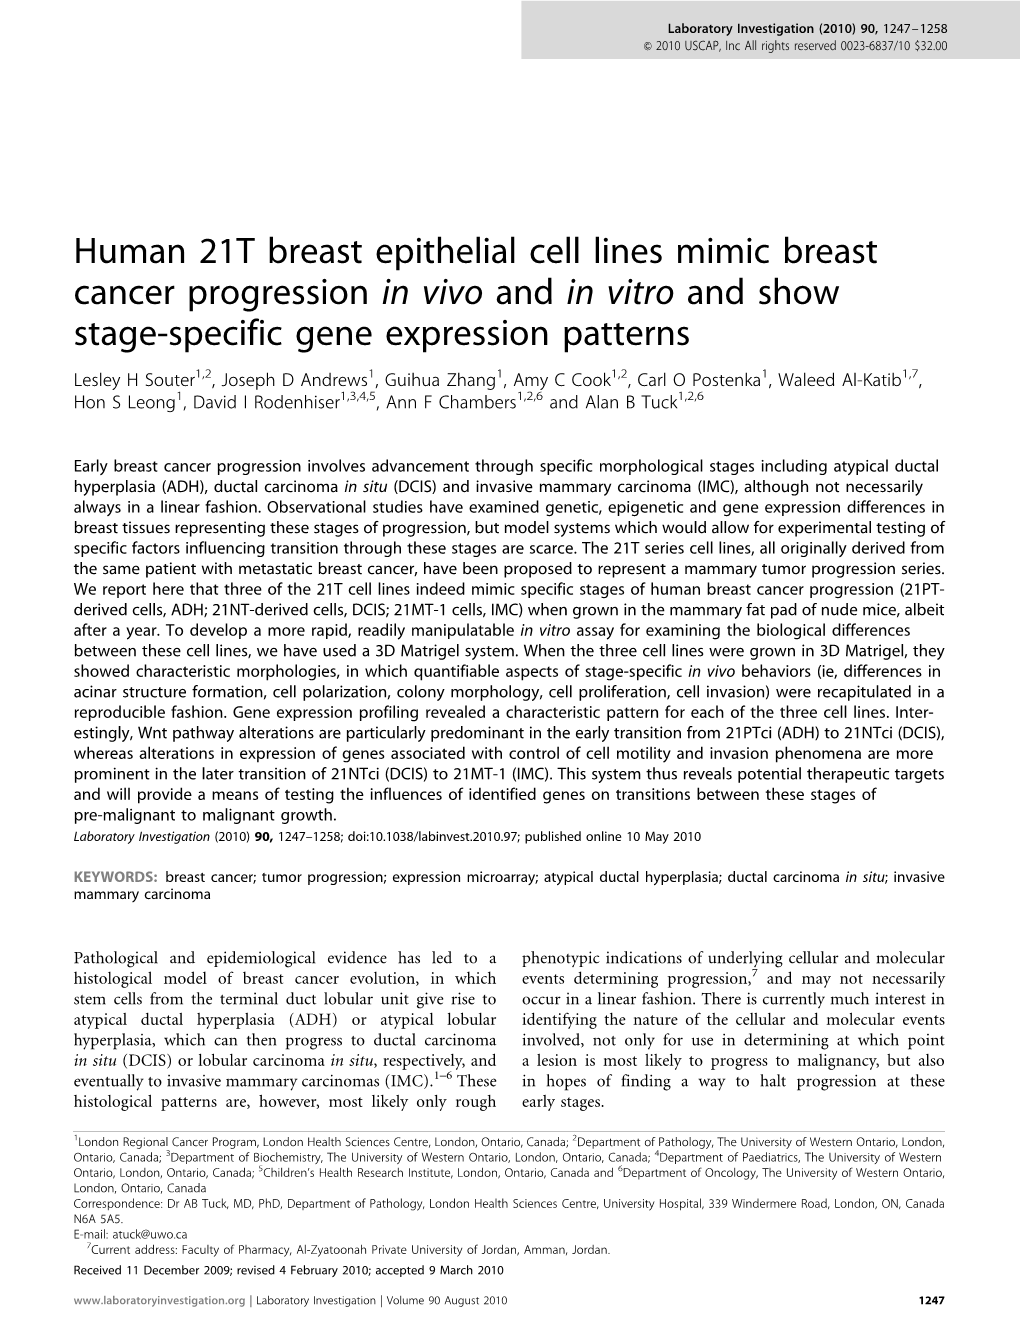 Human 21T Breast Epithelial Cell Lines Mimic Breast Cancer Progression In